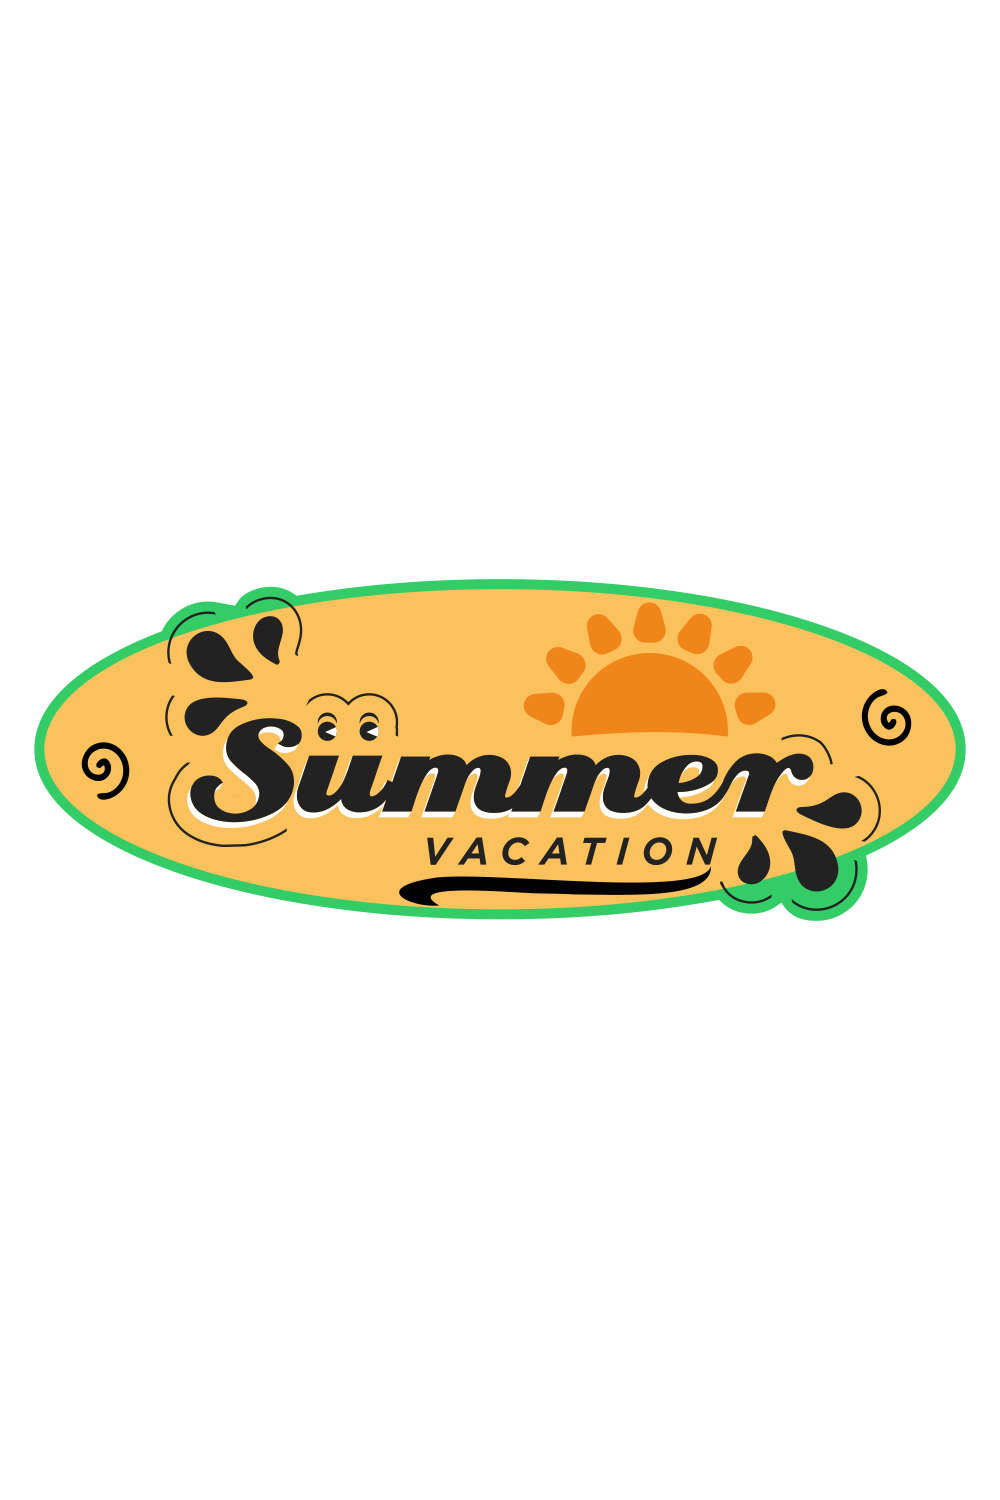 Summer holiday lettering logo with sun vector illustration Summer label, tag, logo, hand lettering for summer vacation, travel, beach holiday pinterest preview image.